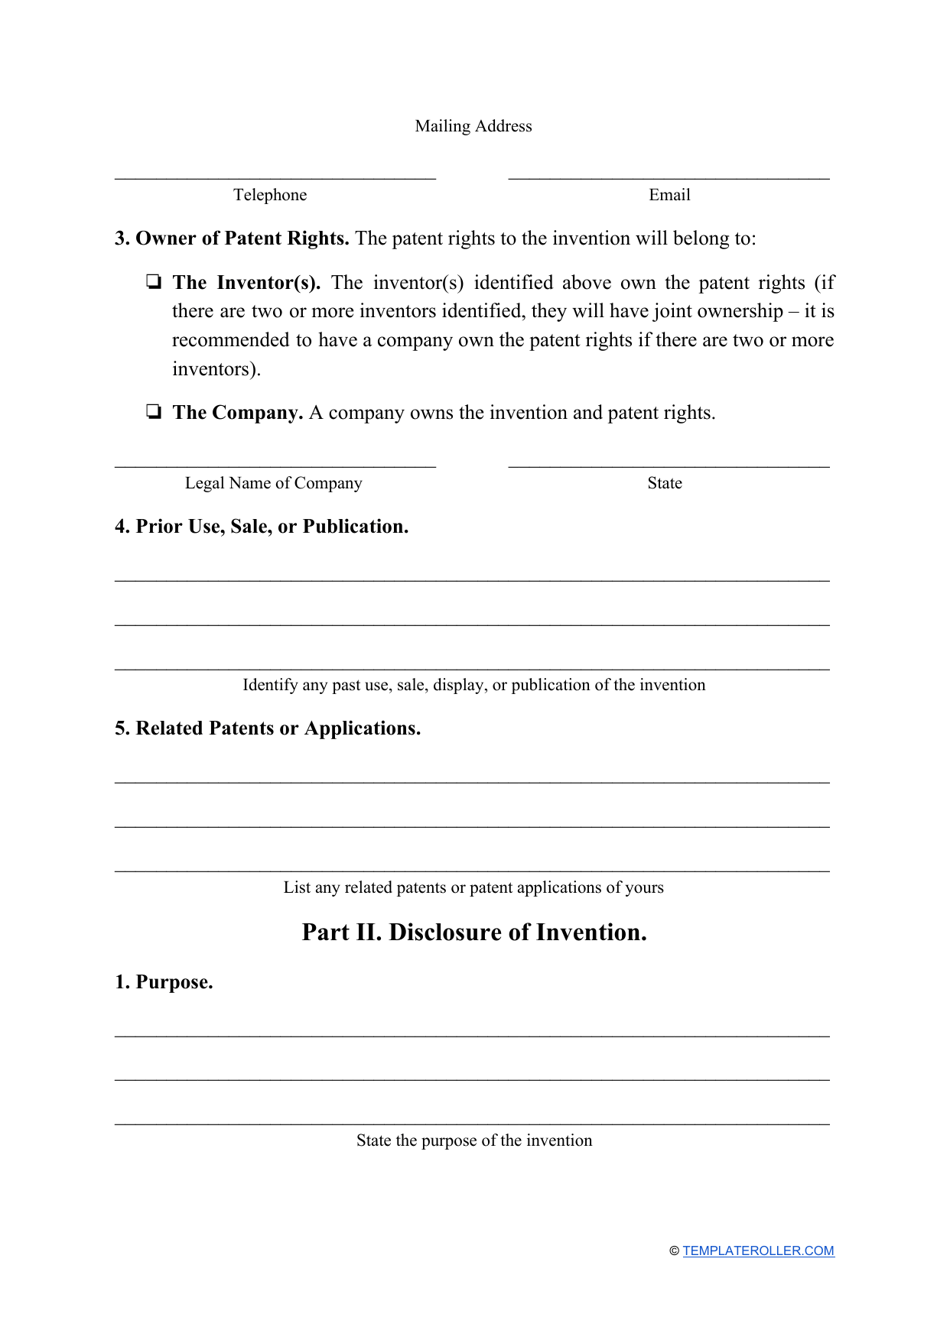 Invention Disclosure Form Fill Out, Sign Online and Download PDF